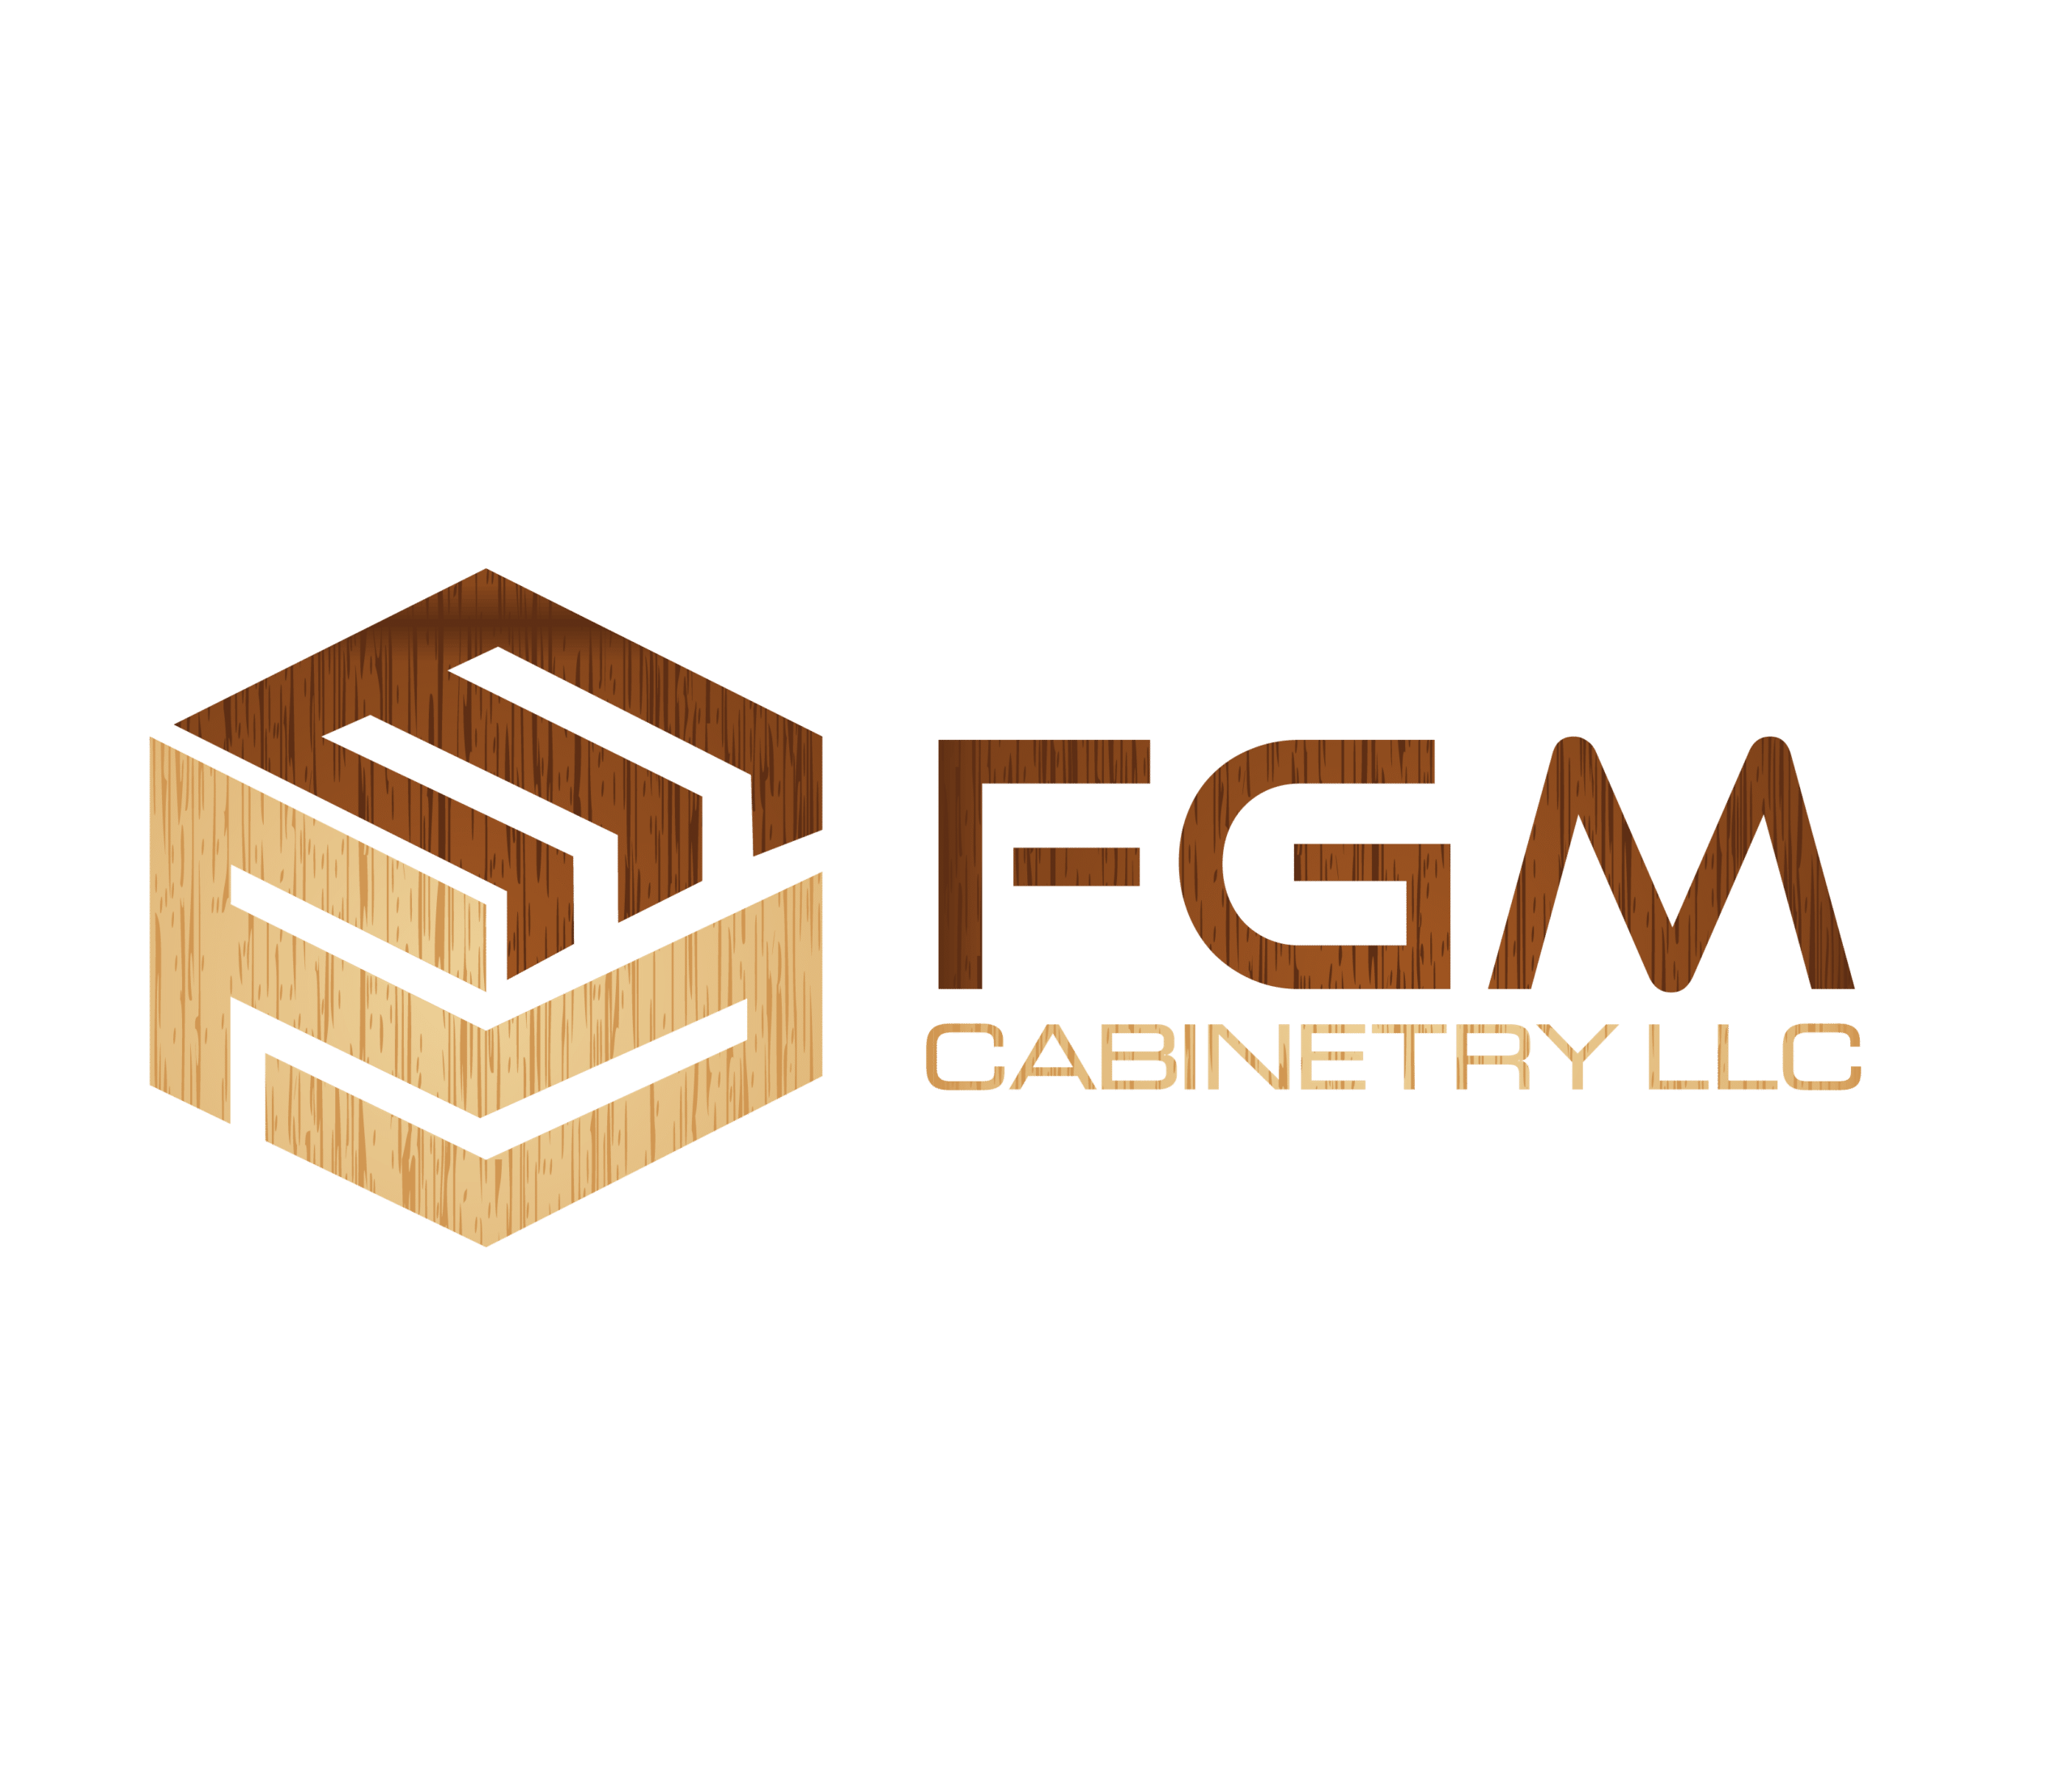 FGM Cabinetry Logo